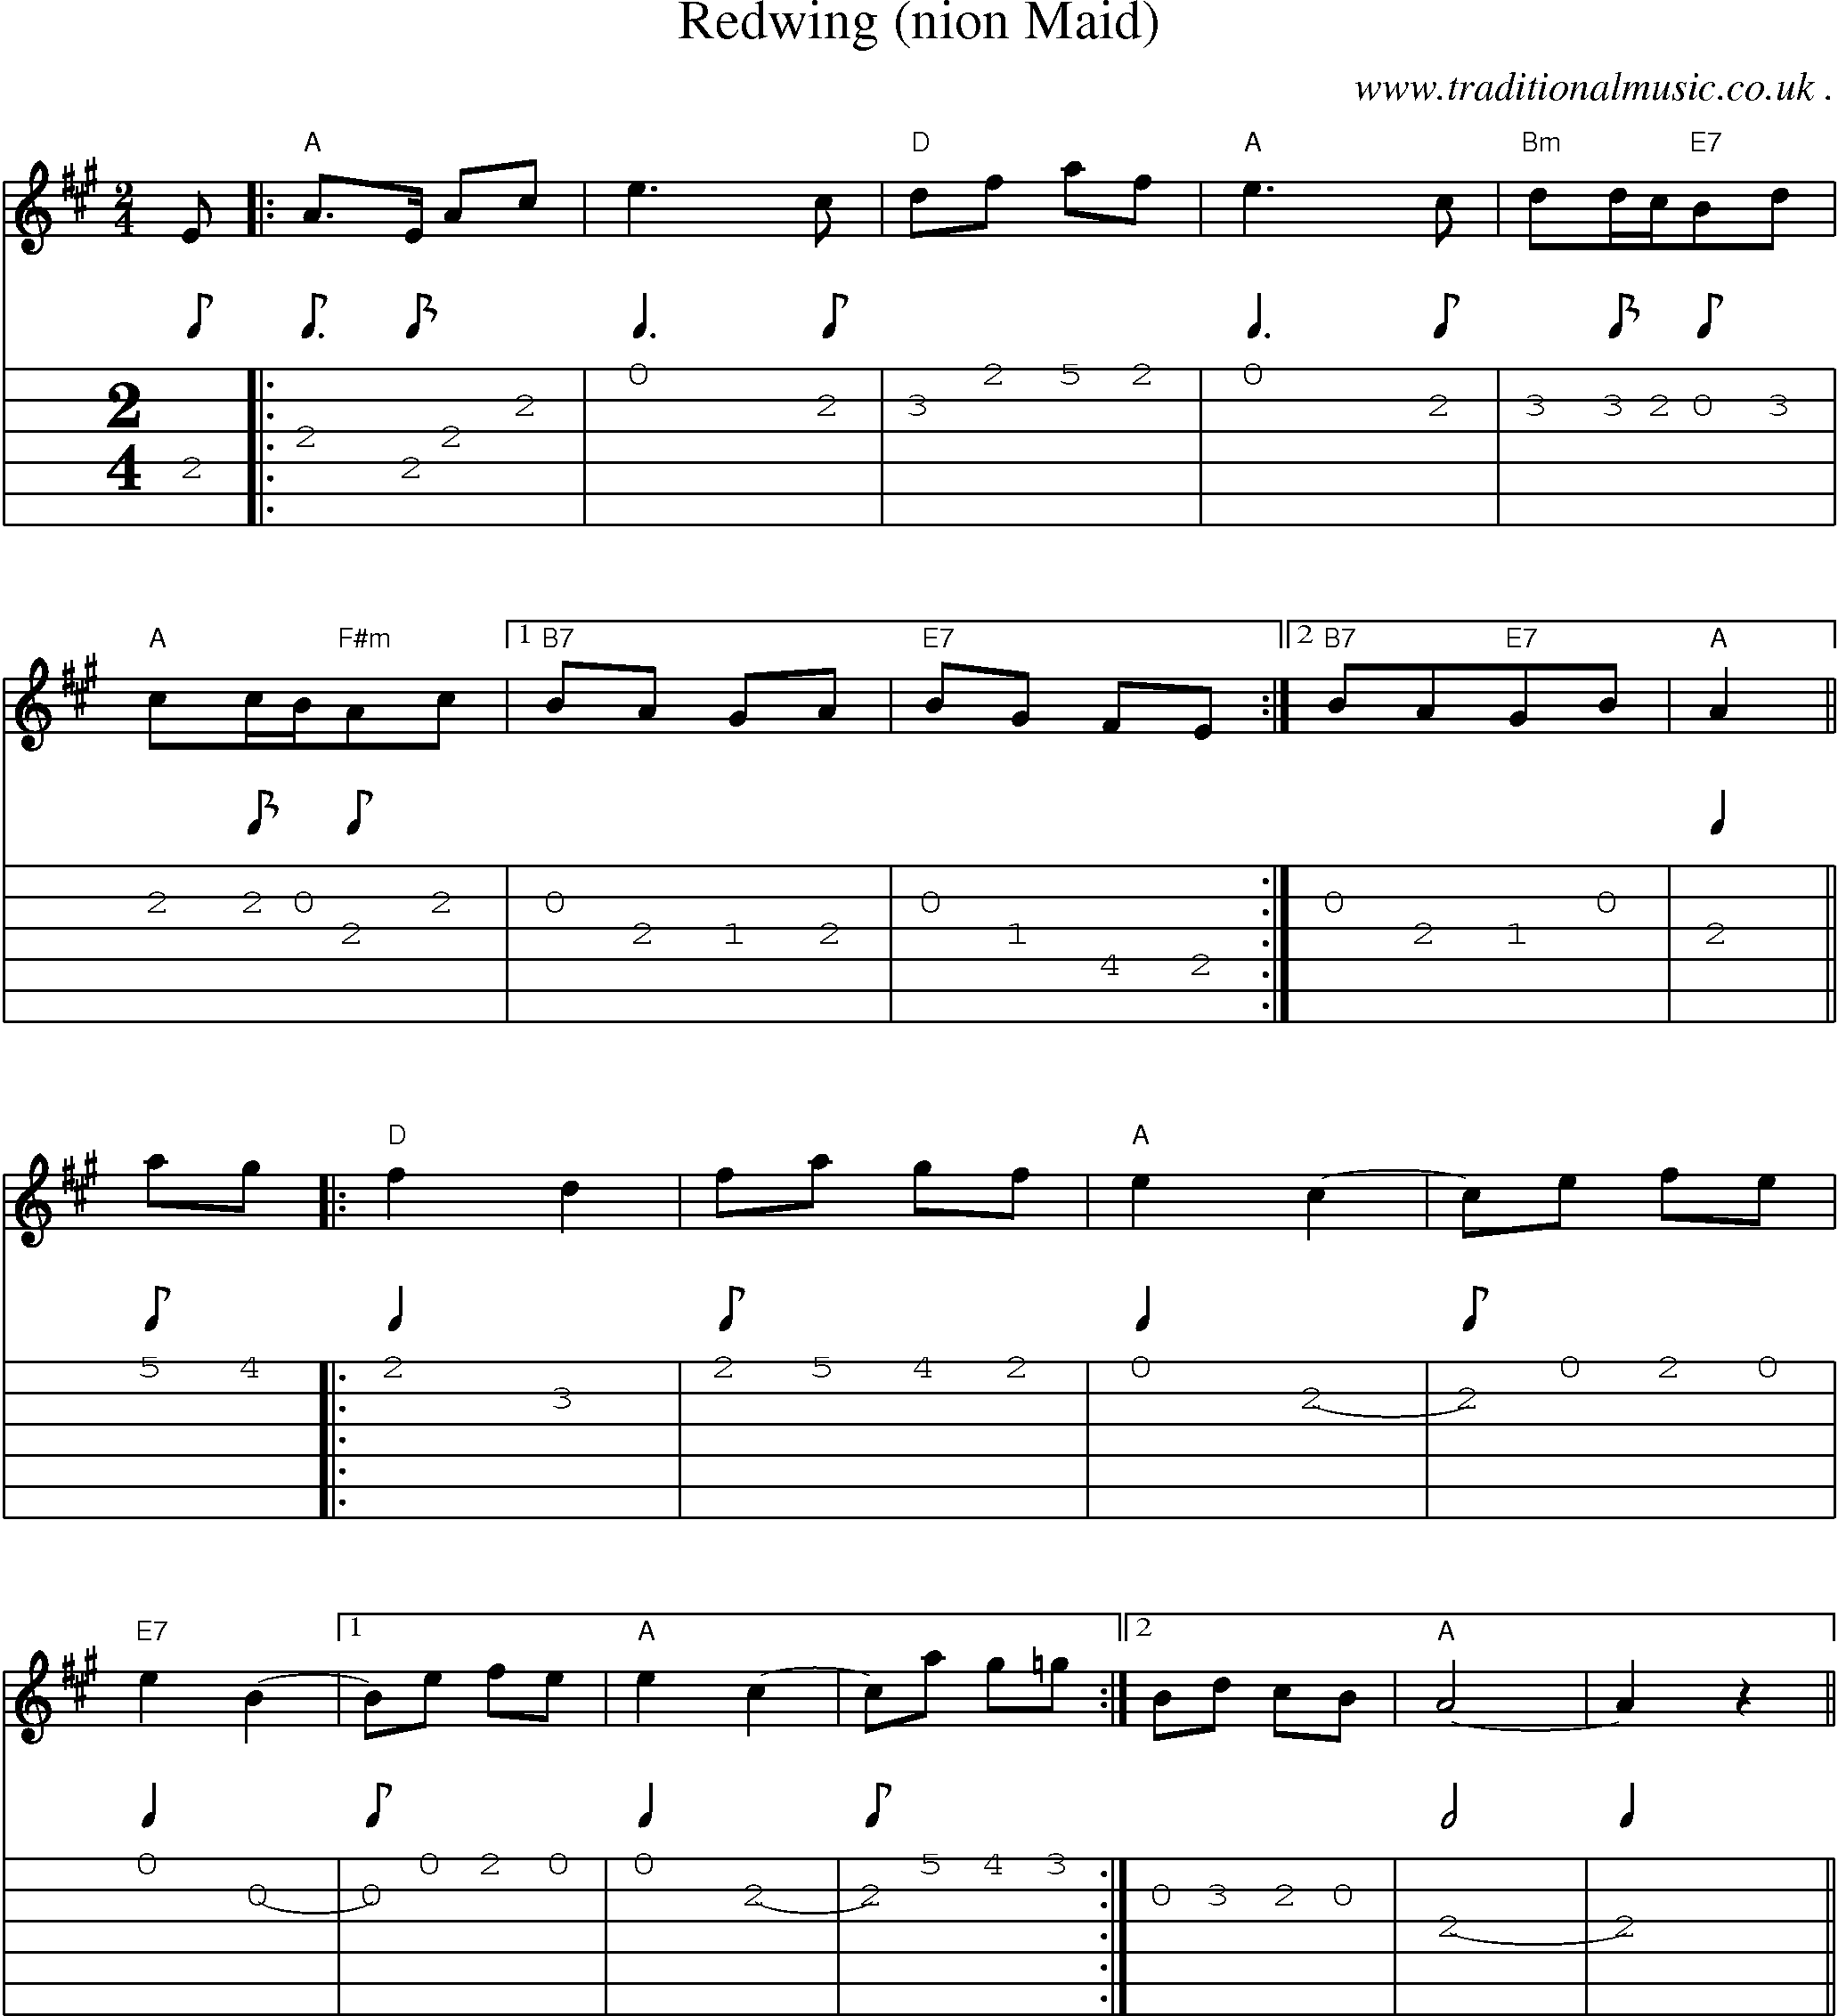 Sheet-Music and Guitar Tabs for Redwing (nion Maid)